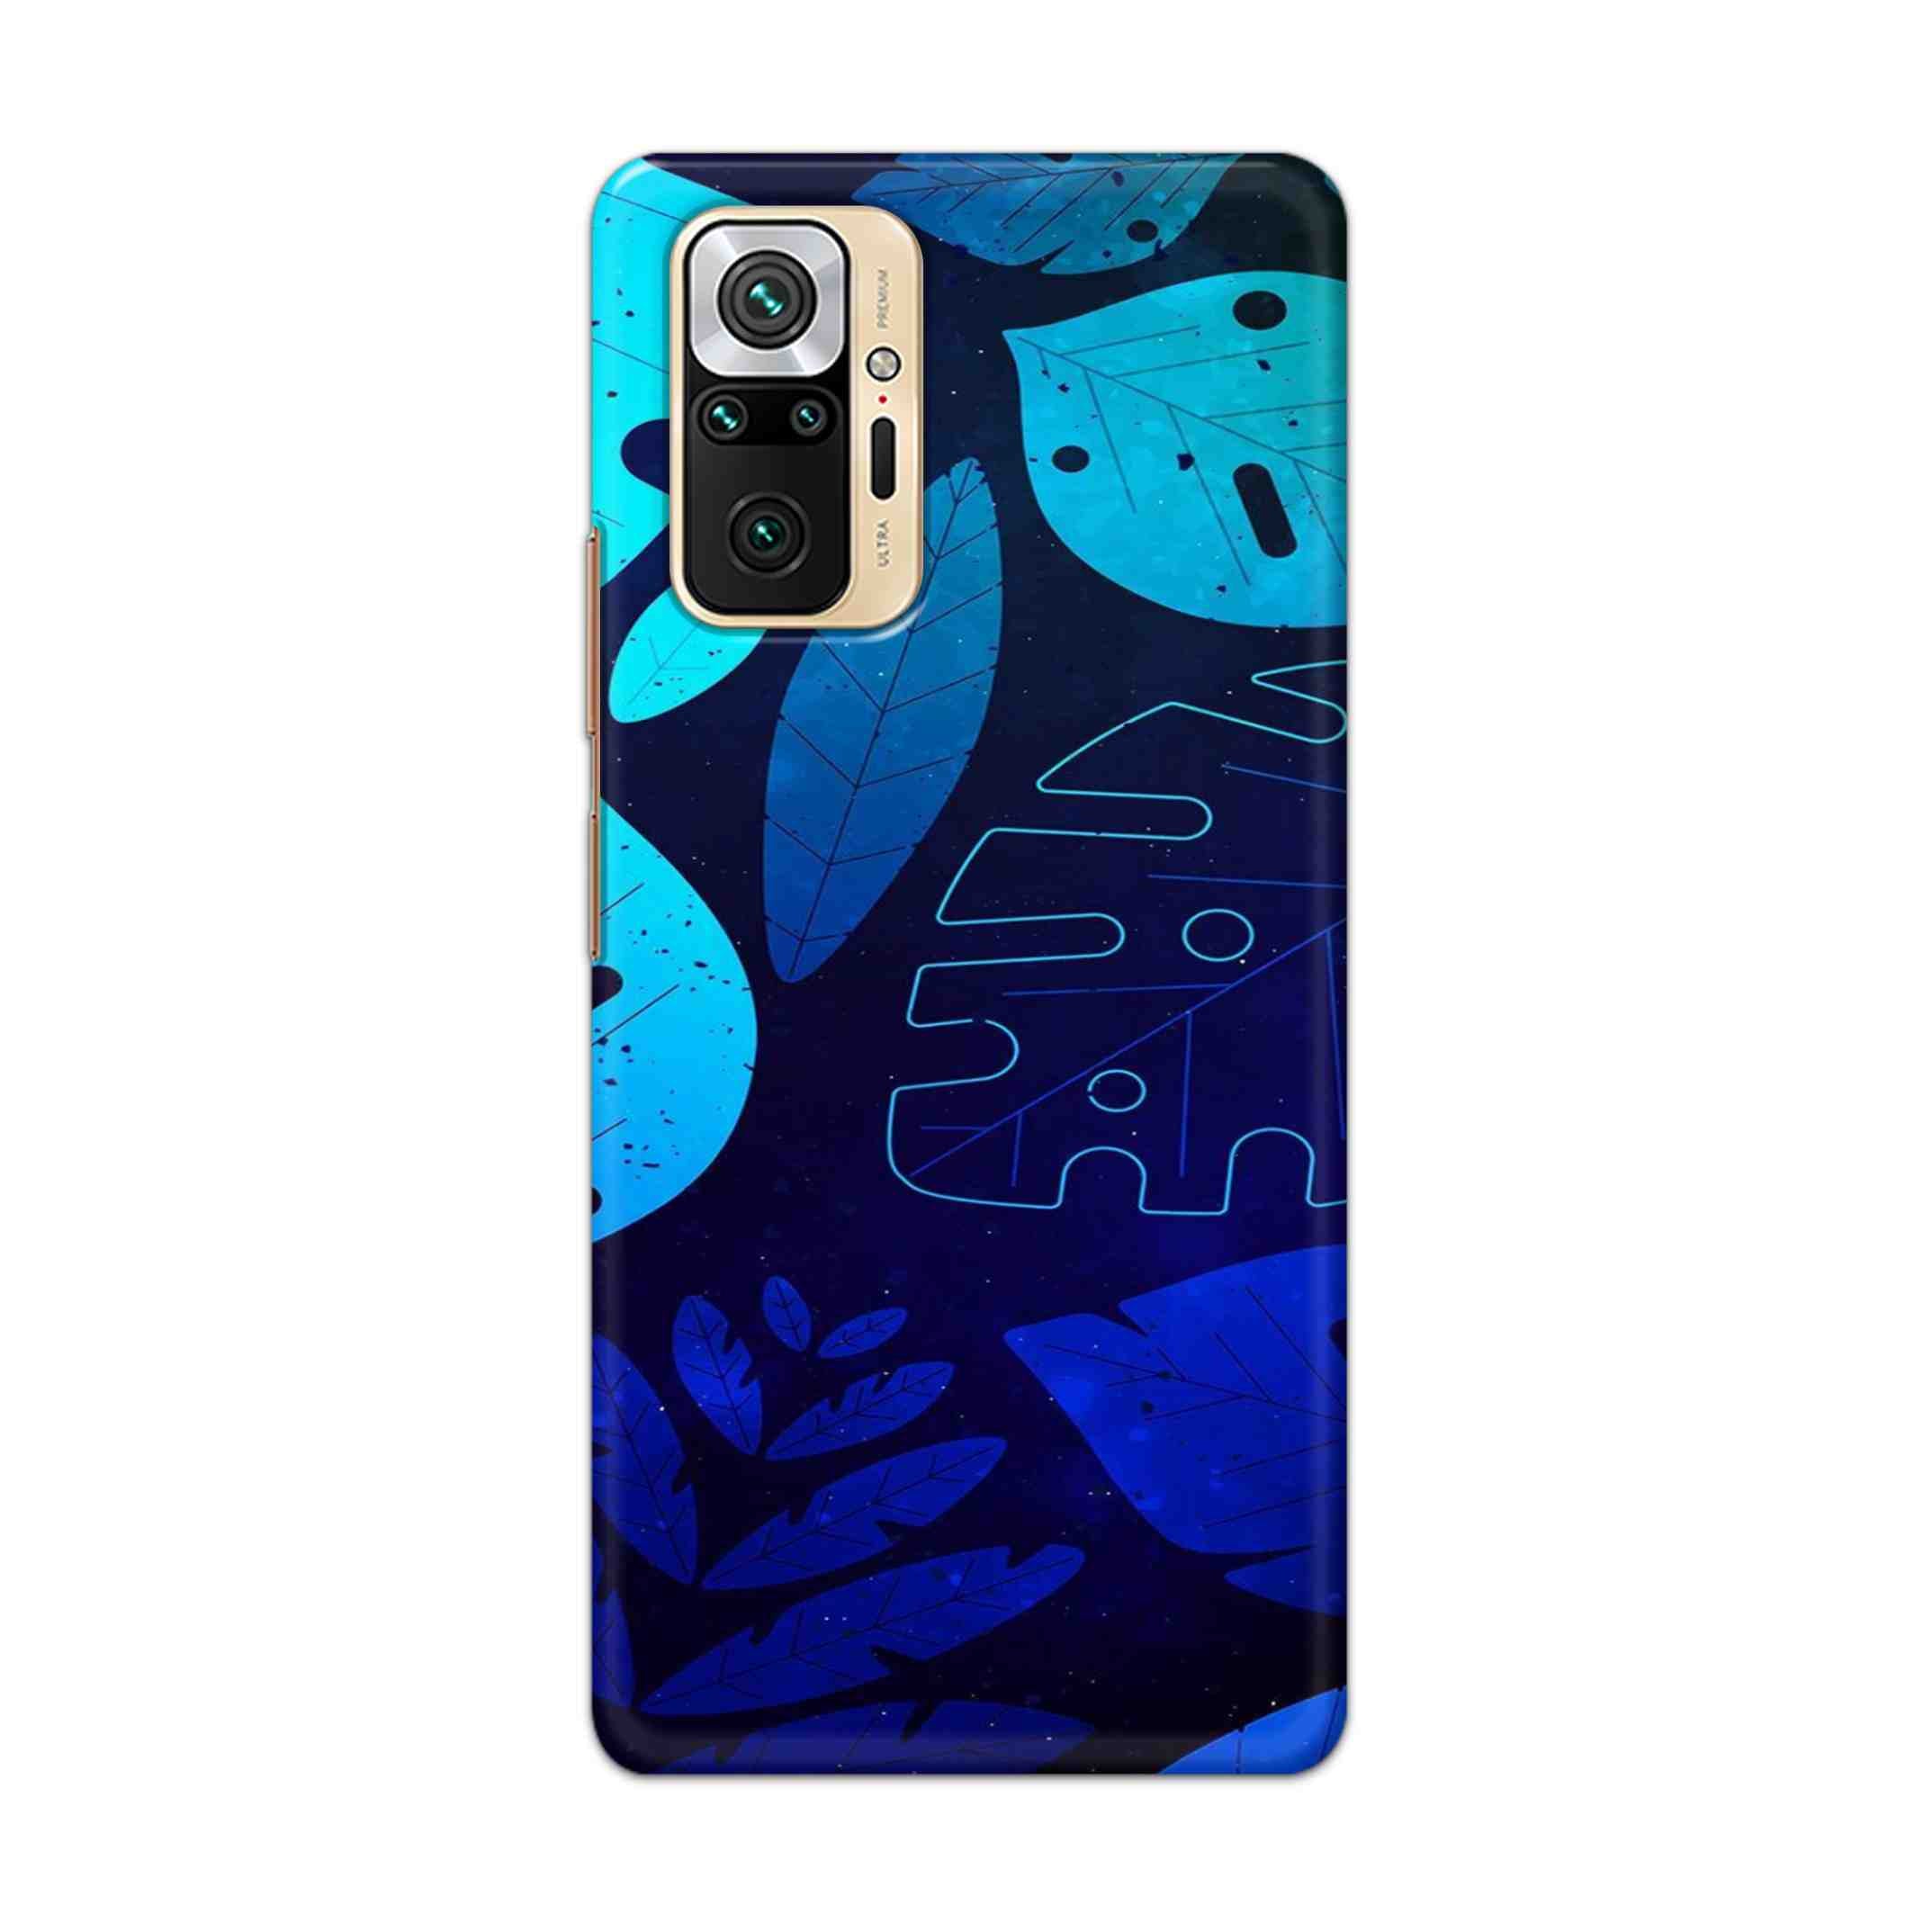 Buy Neon Leaf Hard Back Mobile Phone Case Cover For Redmi Note 10 Pro Online